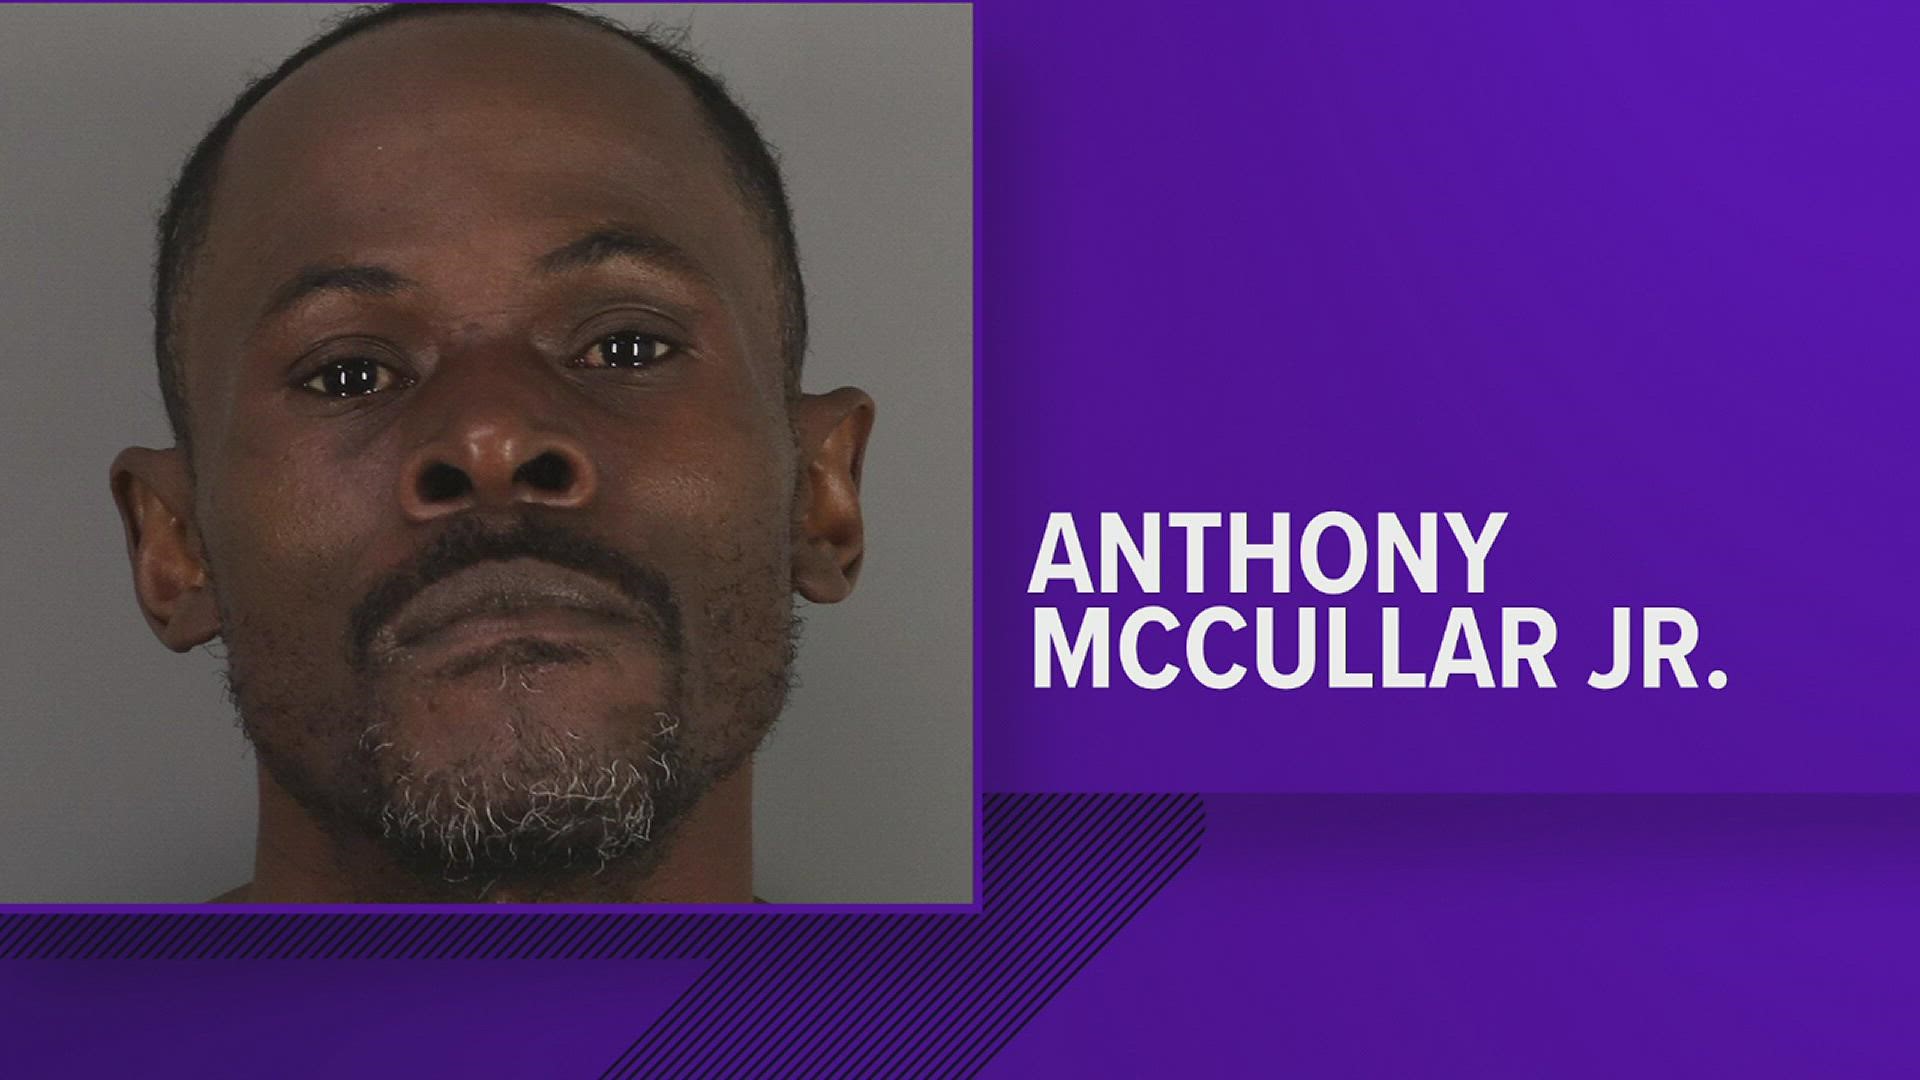 Anthony McCullar is set to be held in on a $1 million bond when he is caught.